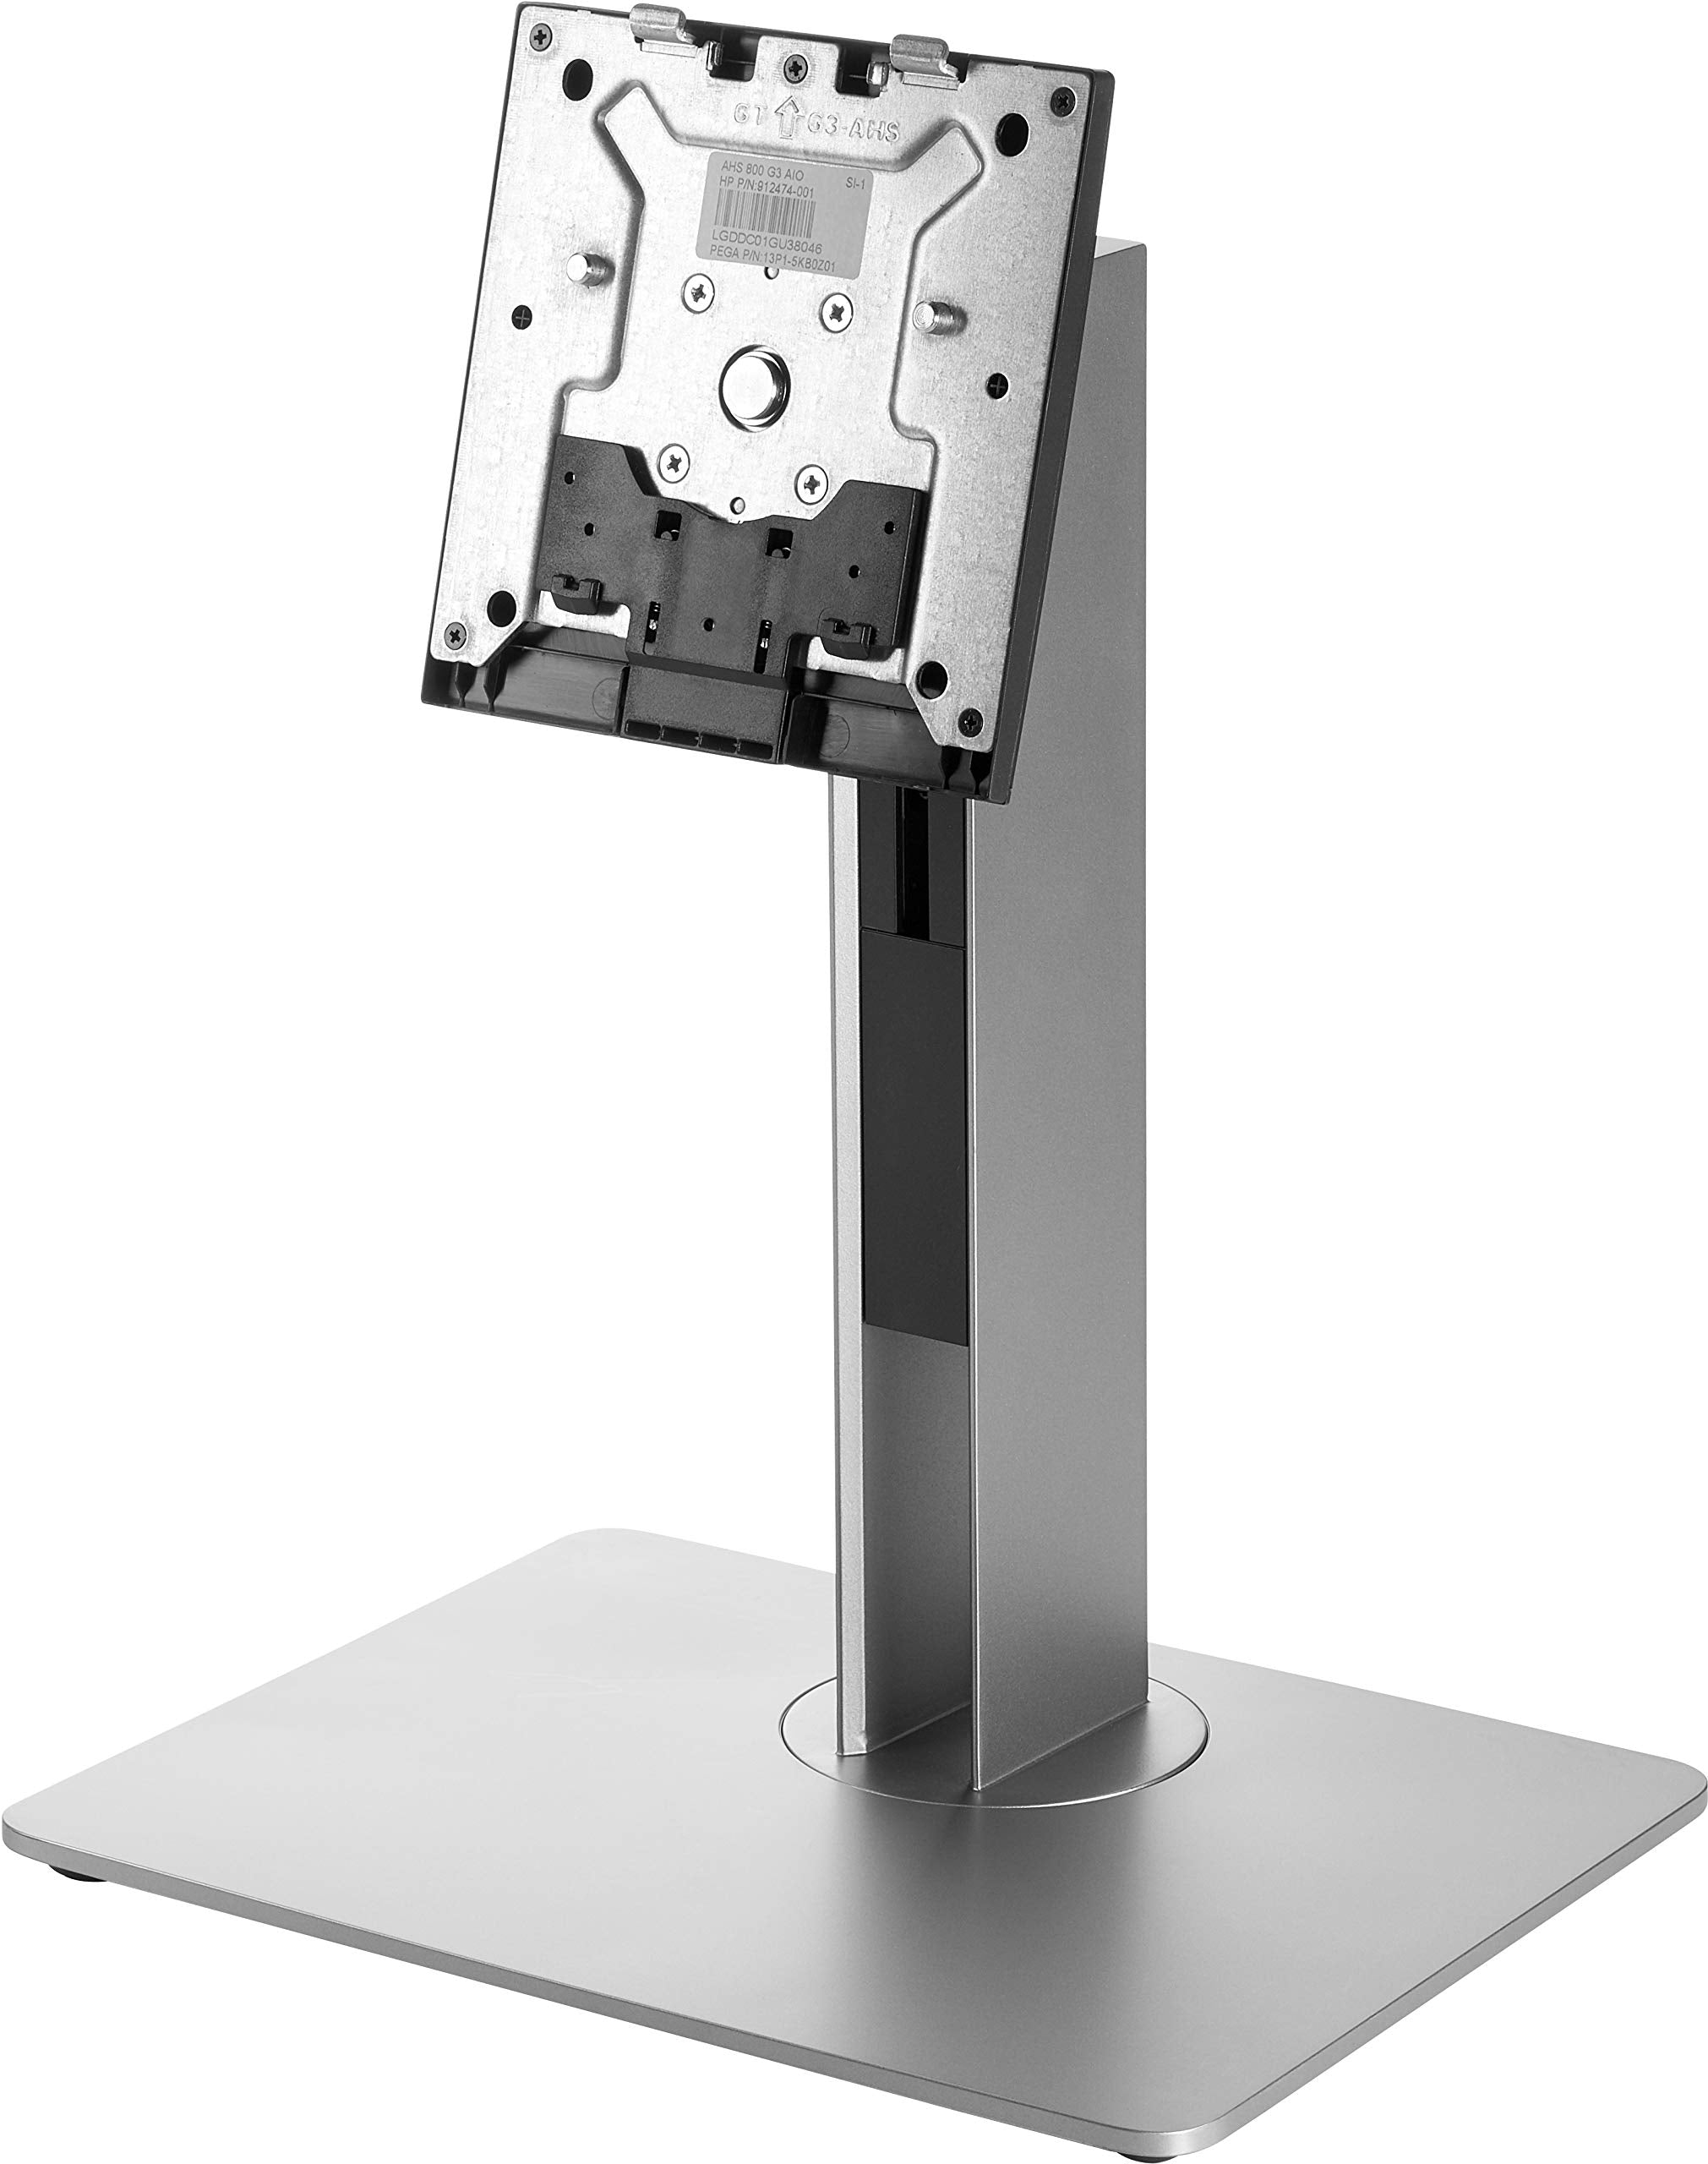 HP 800 G3 AIO adjustable height stand